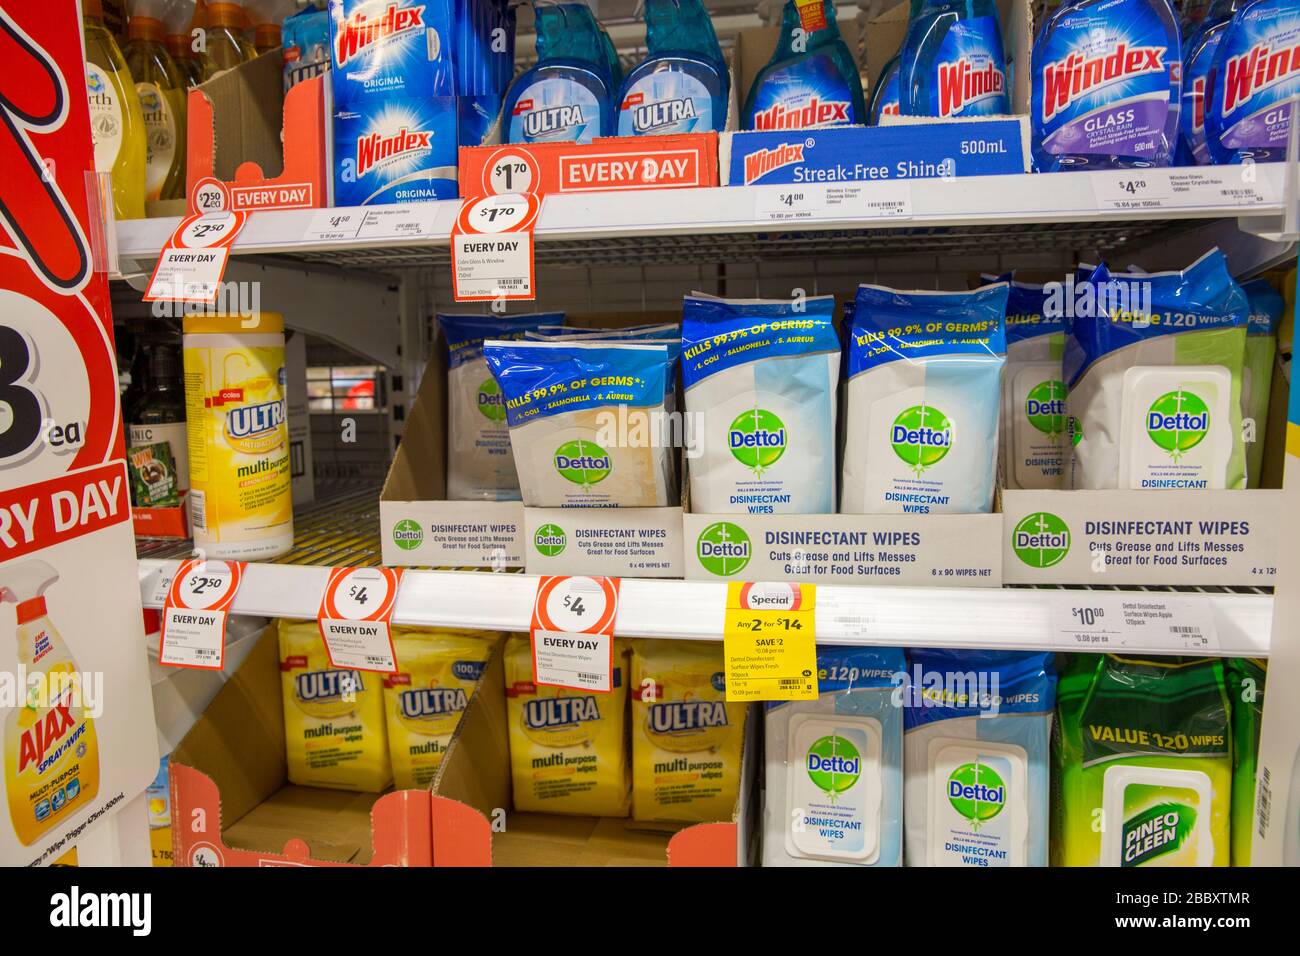 Dettol and ajax disinfectant wipes and cleaning materials i nan australian supermarket Stock Photo